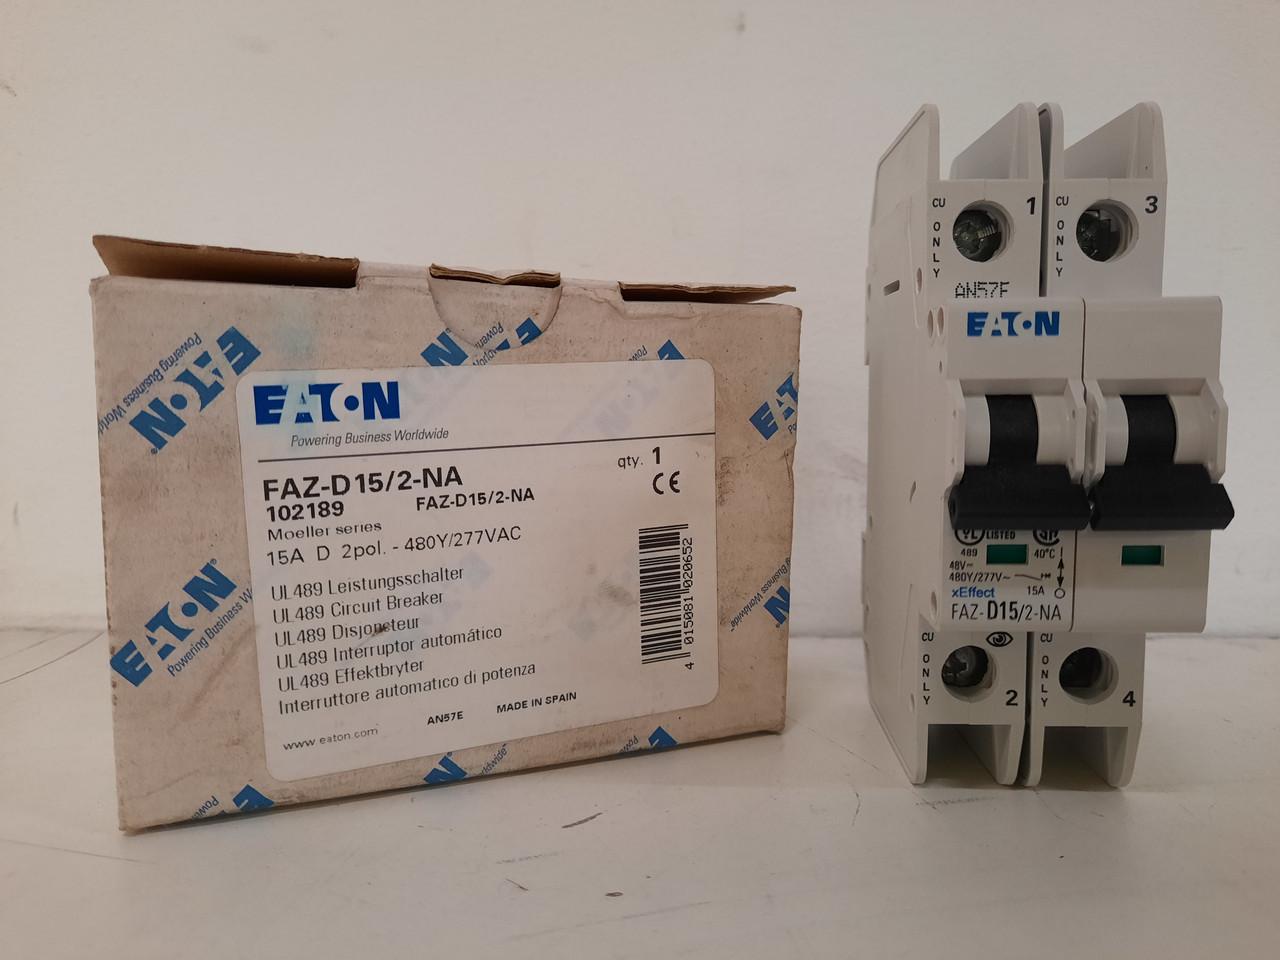 Eaton FAZ-D15/2-NA 277/480 VAC 50/60 Hz, 15 A, 2-Pole, 10/14 kA, 10 to 20 x Rated Current, Screw Terminal, DIN Rail Mount, Standard Packaging, D-Curve, Current Limiting, Thermal Magnetic